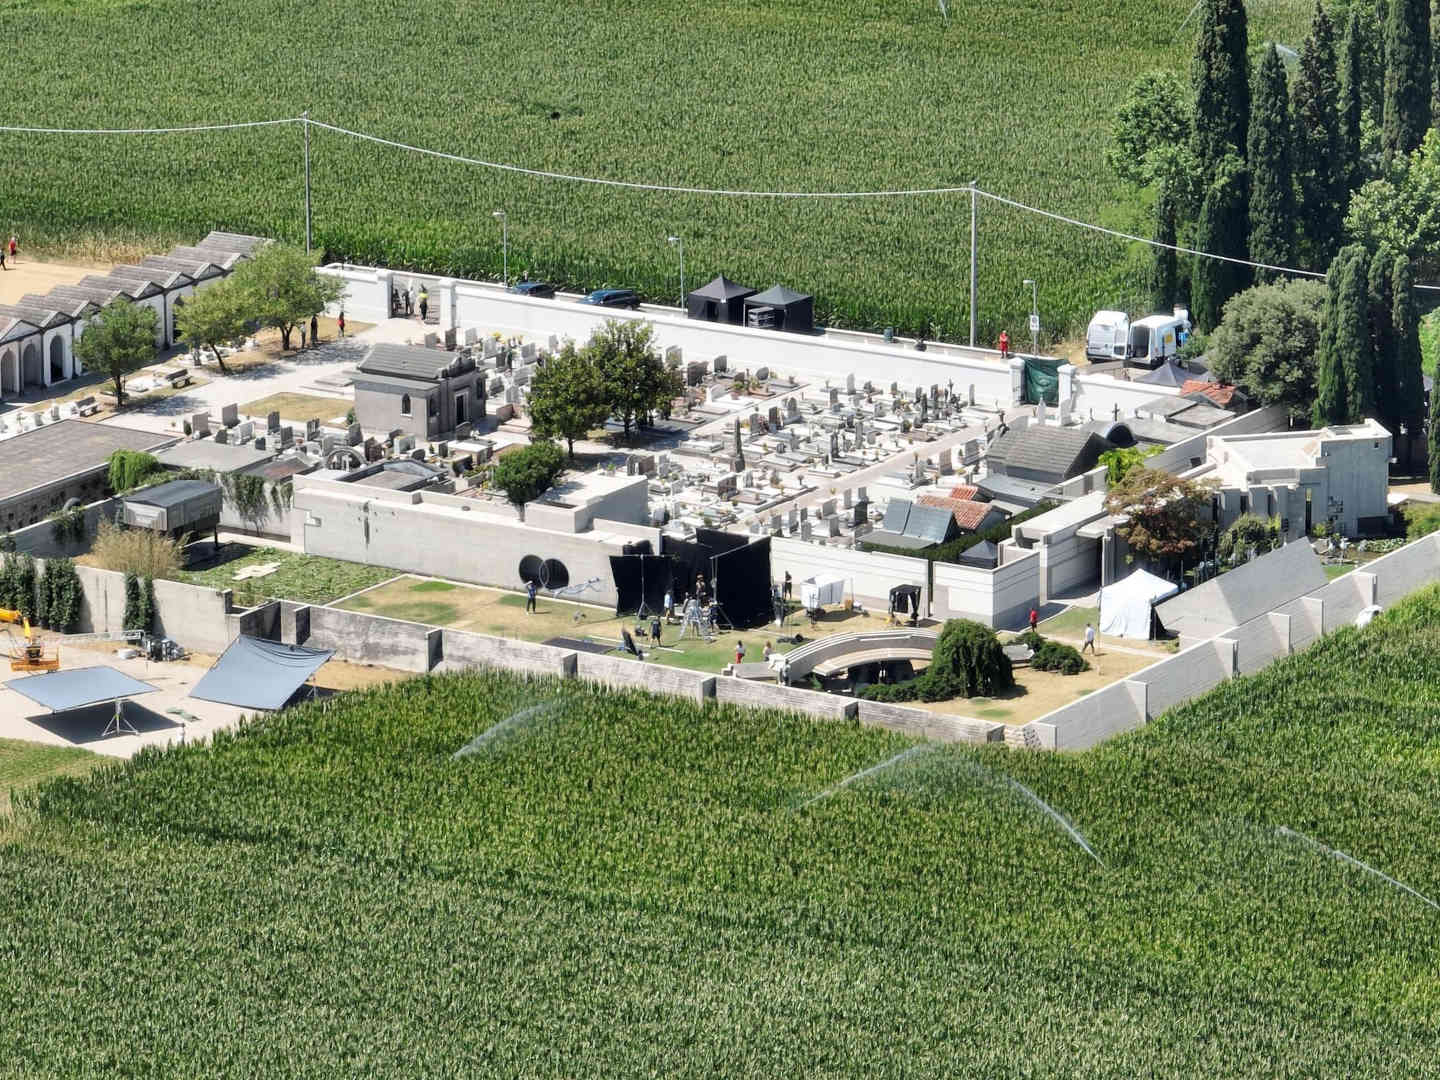 Aerial photo of 'Dune: Part Two' film set at the Brion Tomb in Altivole, Italy.